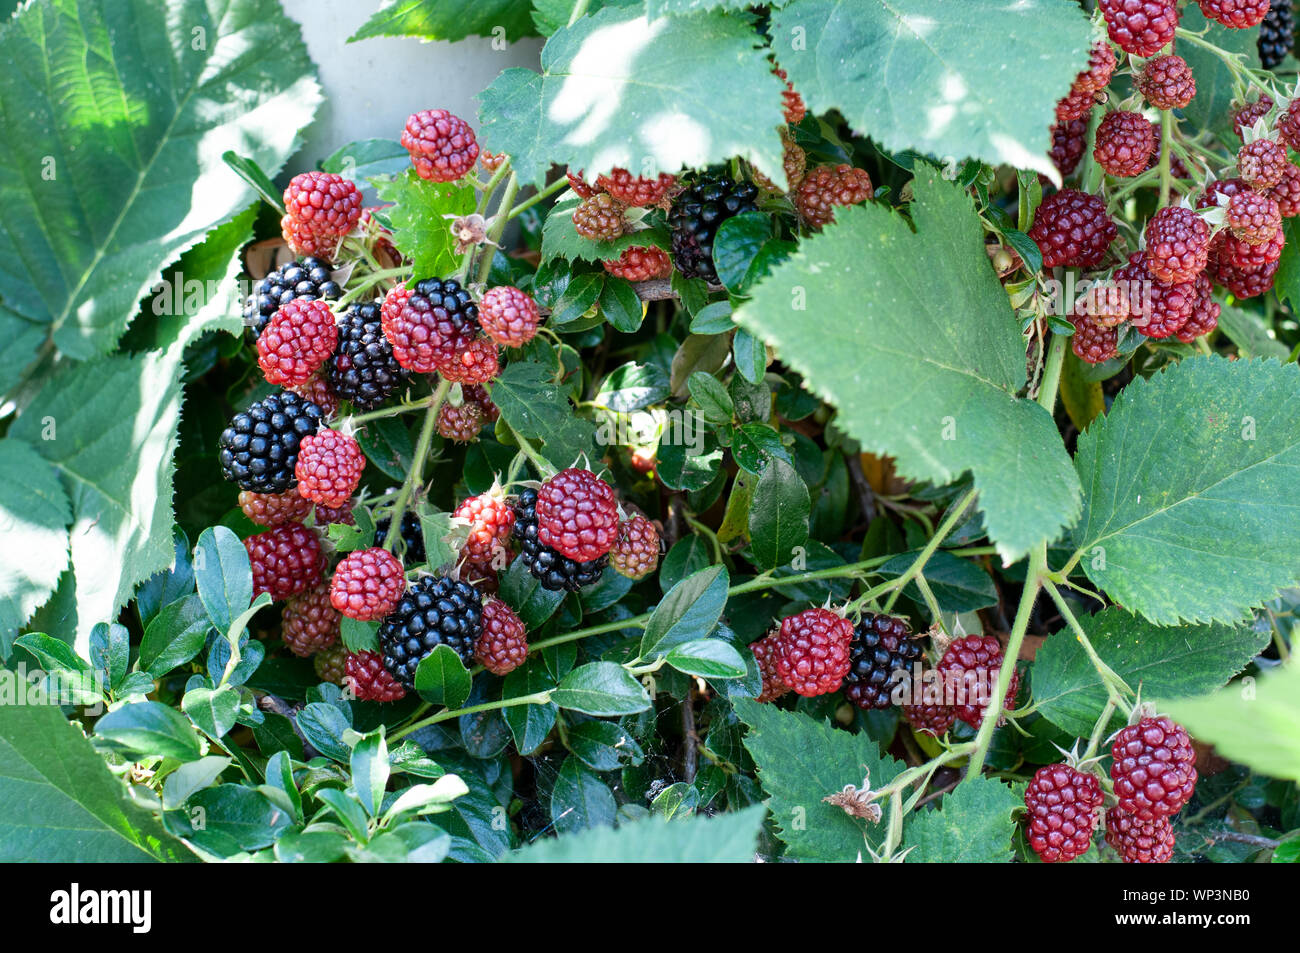 branch of a blackberry shrub in summer with red and black fruits Stock Photo